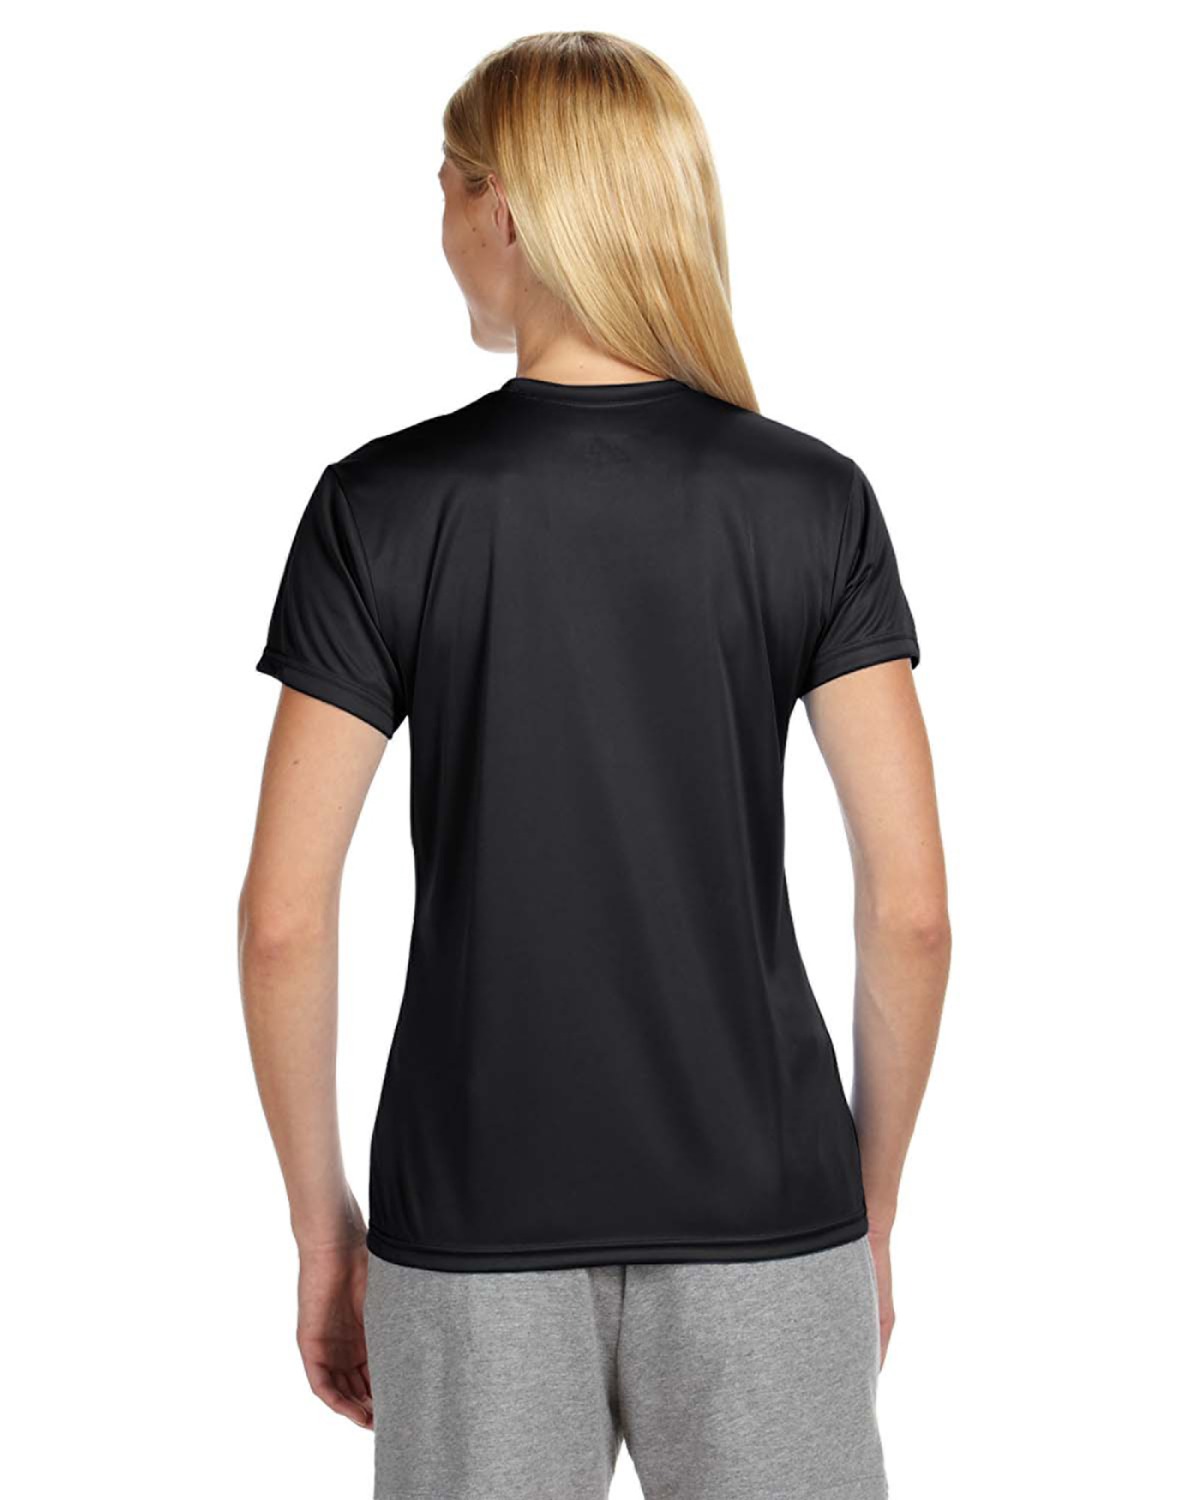 A4 NW3201 | Ladies' Cooling Performance T-Shirt | ShirtSpace